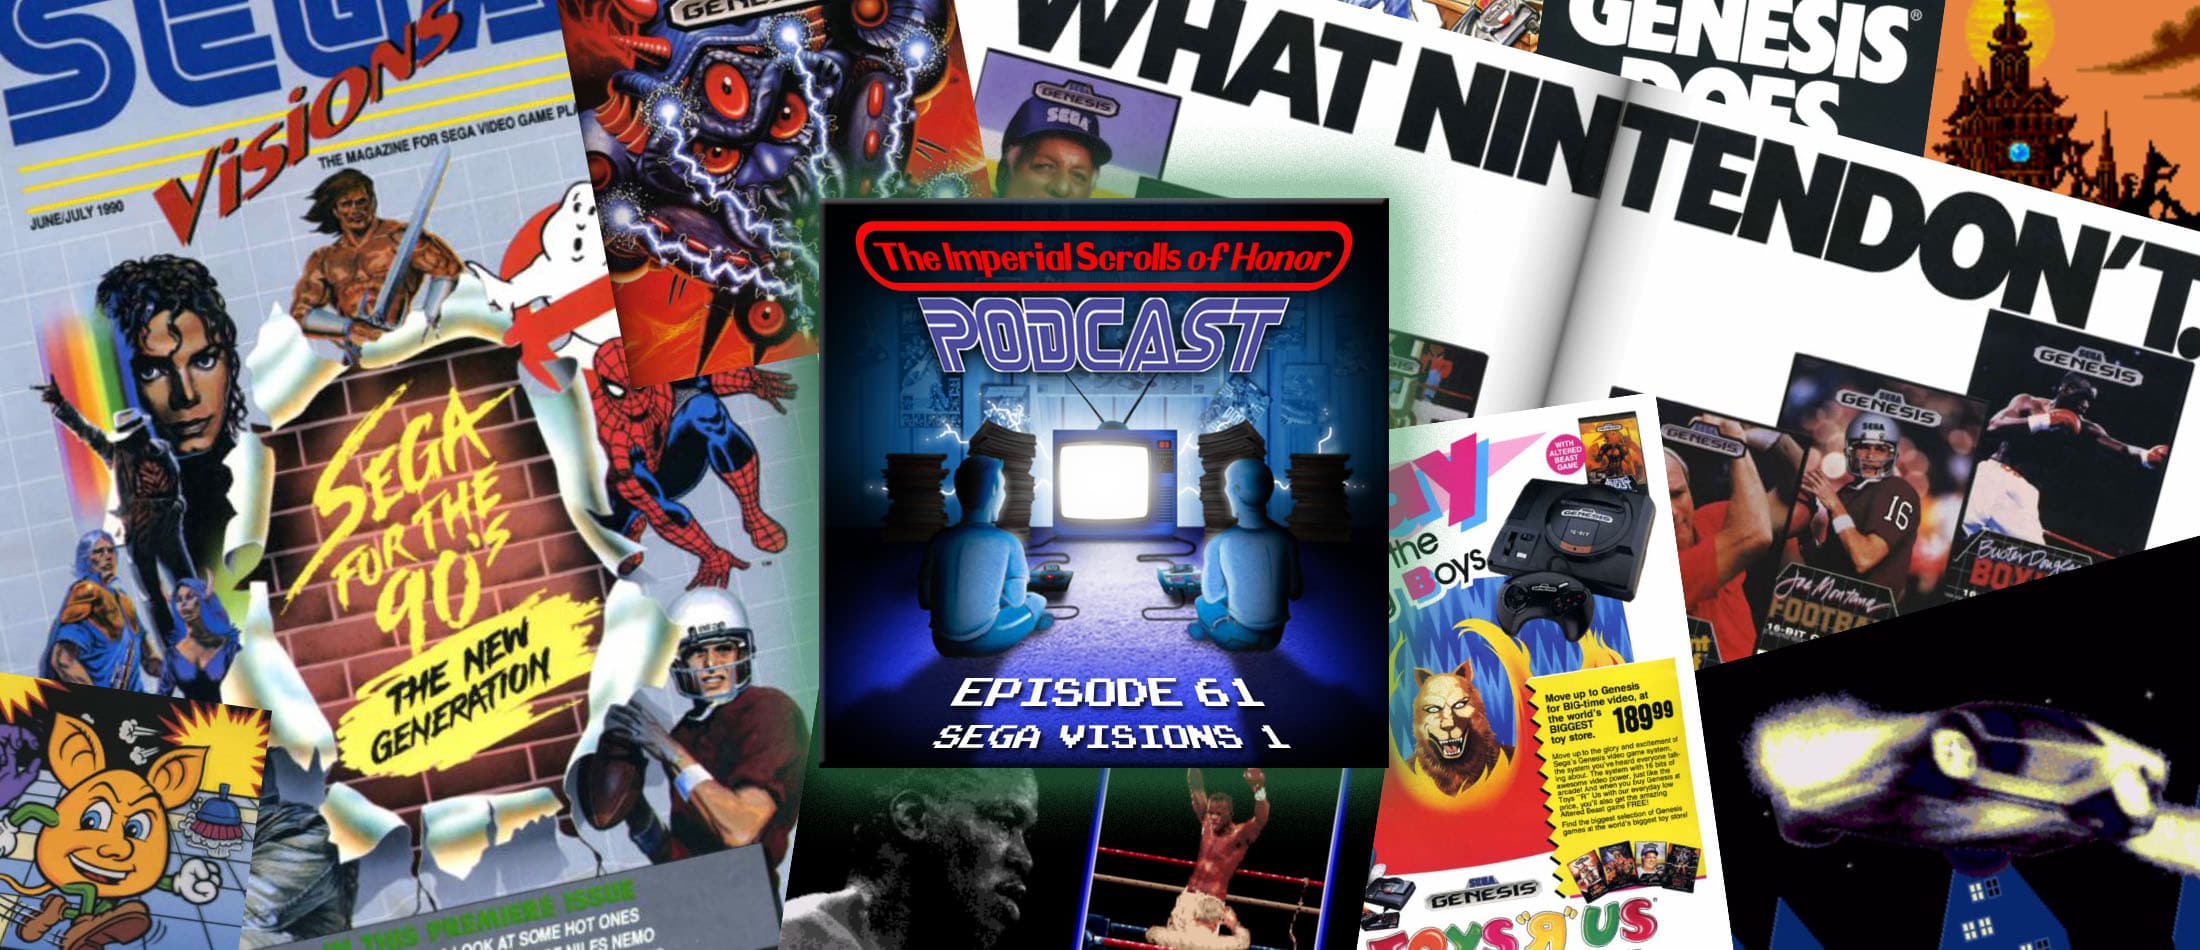 The Imperial Scrolls of Honor Podcast - Ep 61 - Sega Visions #1